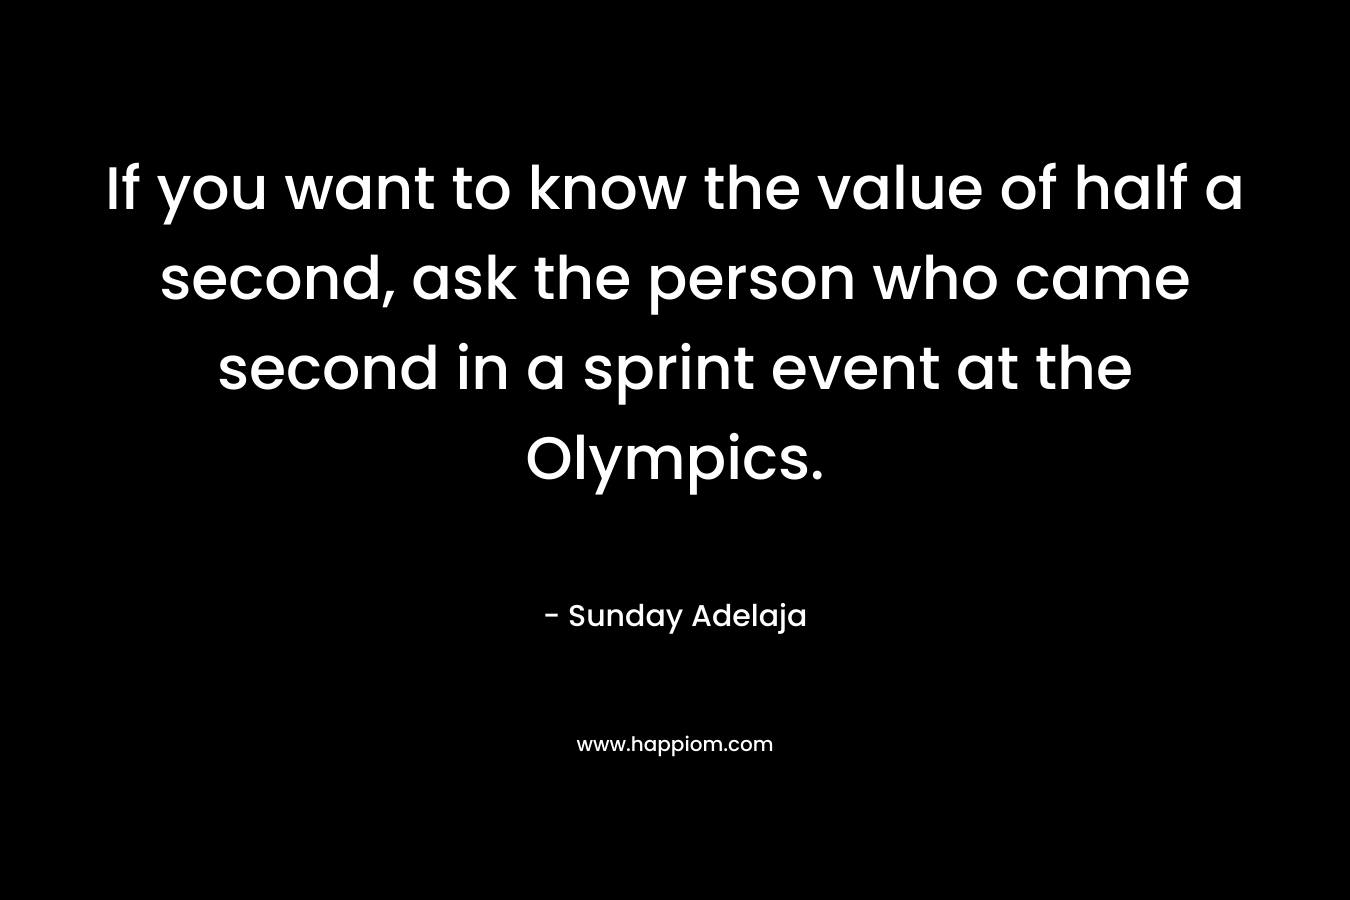 If you want to know the value of half a second, ask the person who came second in a sprint event at the Olympics. – Sunday Adelaja